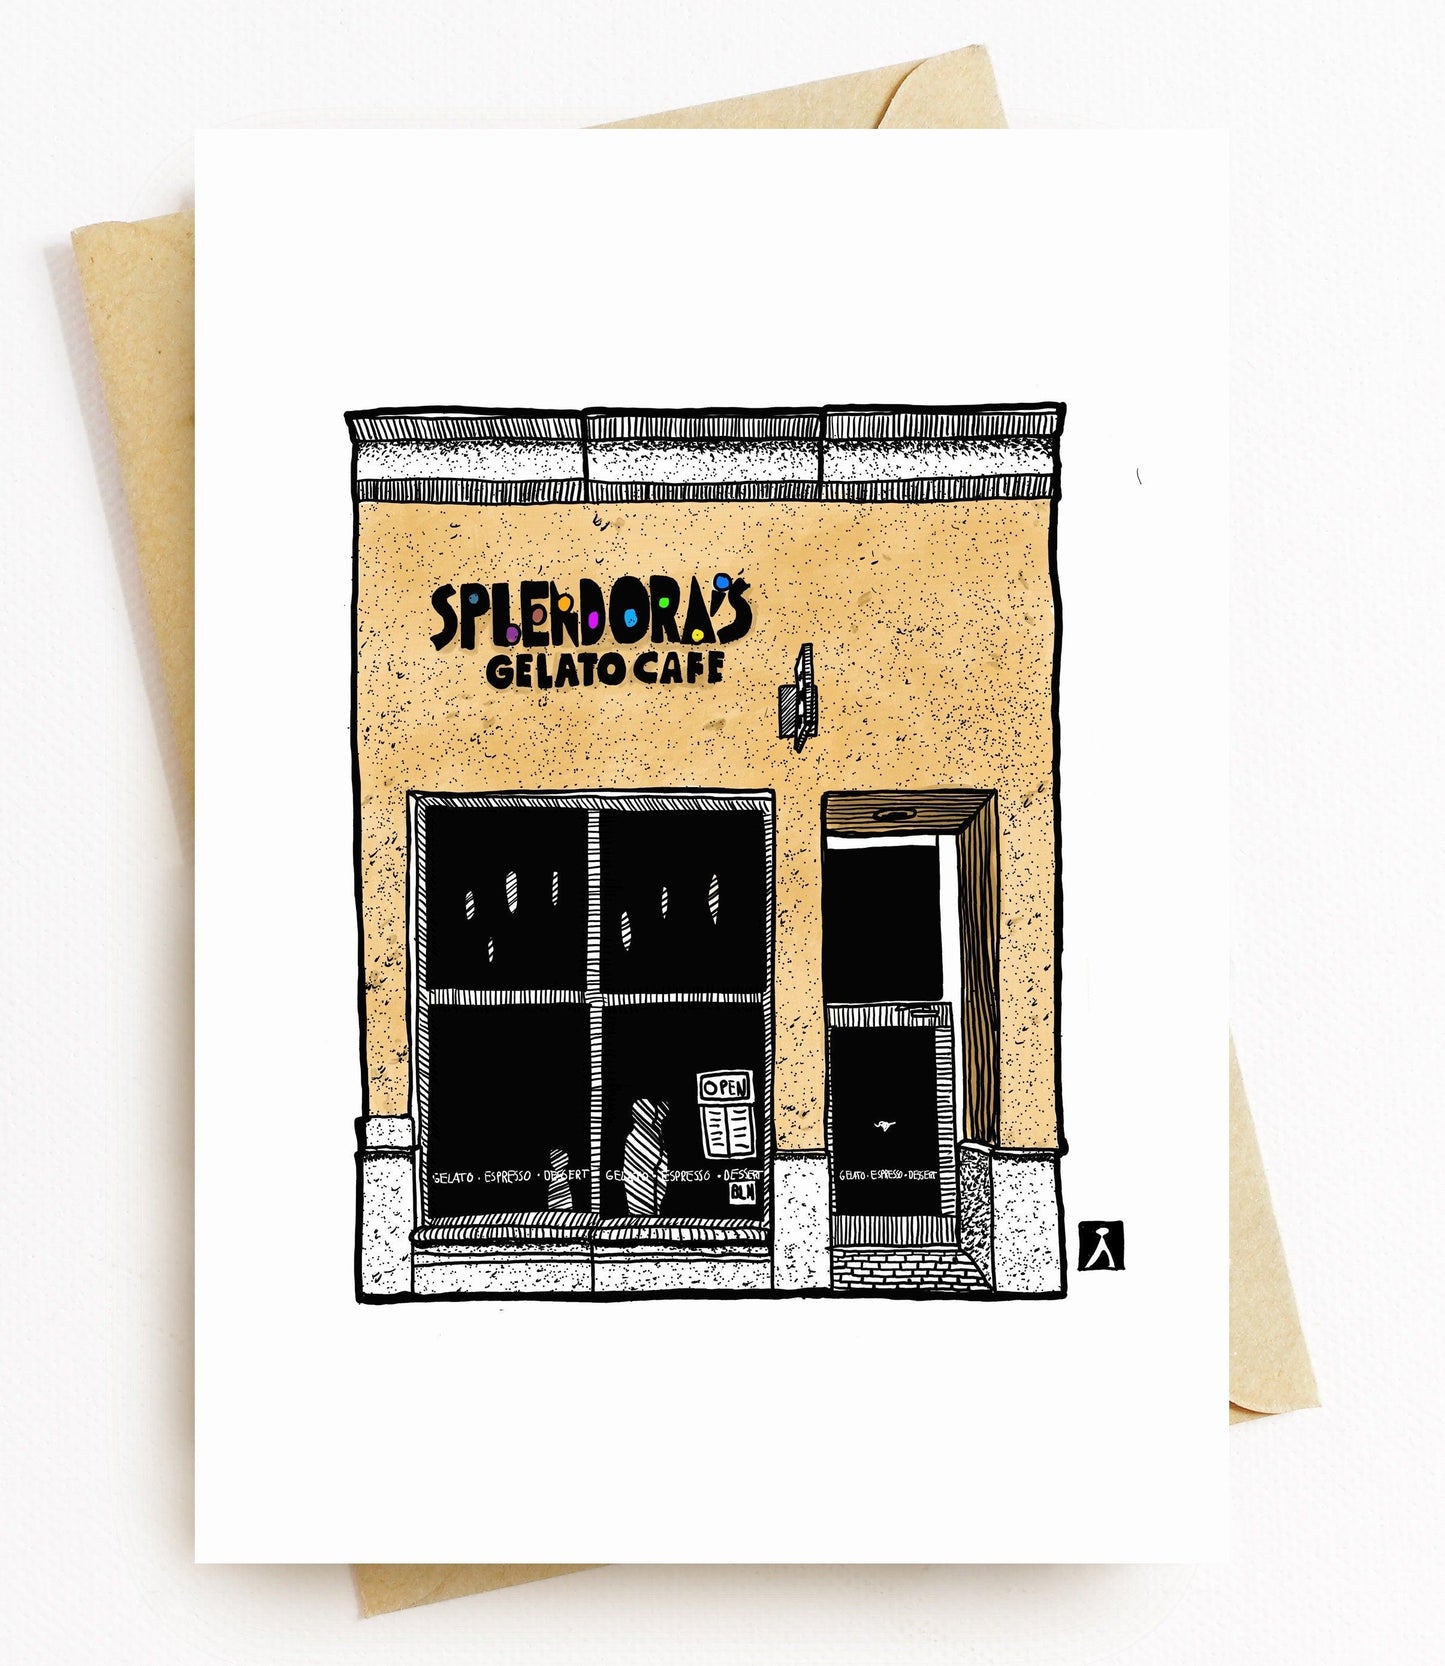 BellavanceInk: Greeting Card With A Pen & Ink Drawing Of Splendora's Gelato Cafe In Charlottesville  5 x 7 Inches - BellavanceInk